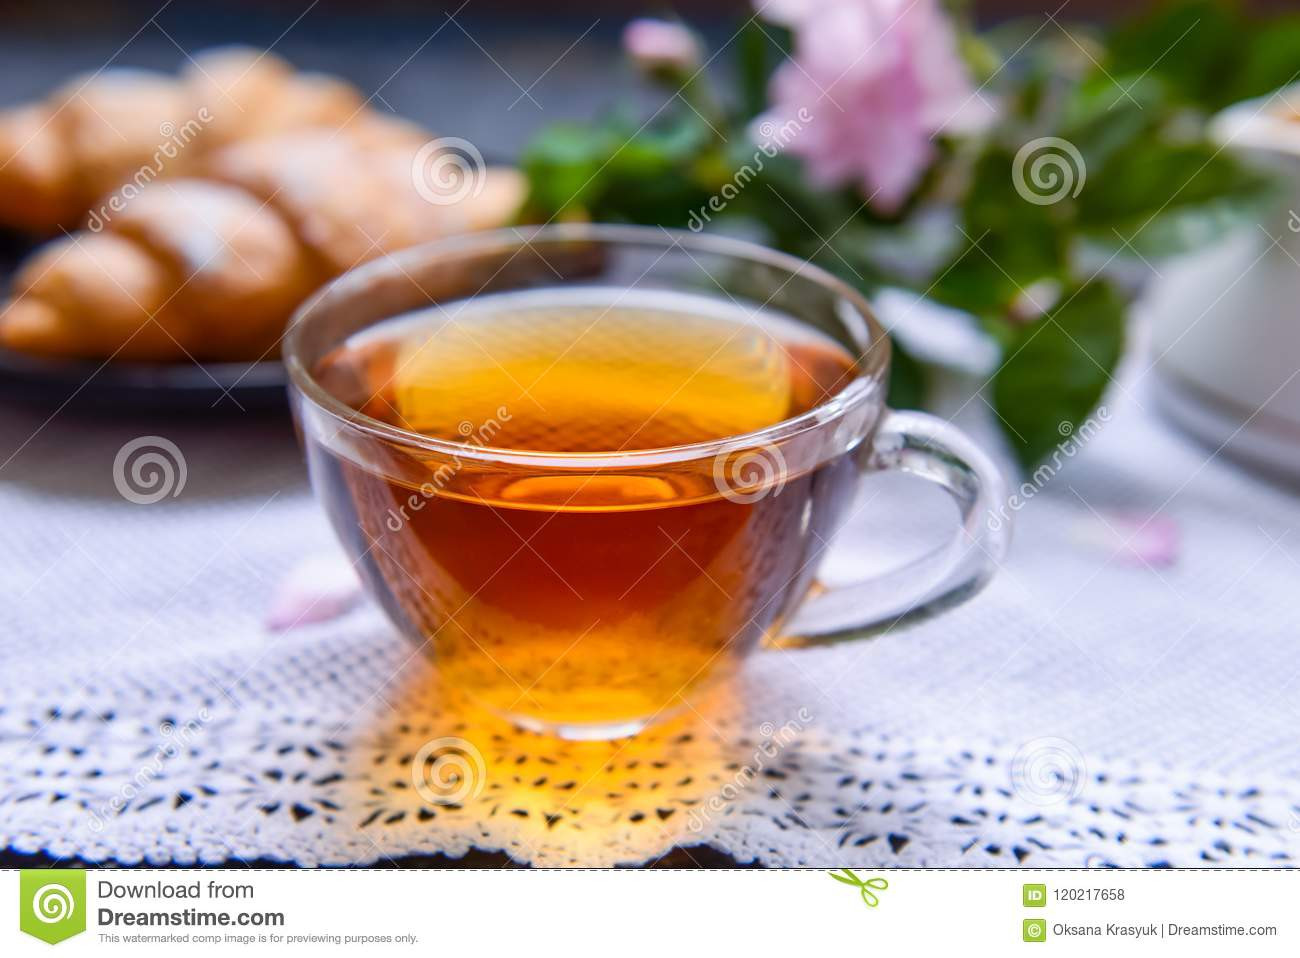 14 Cute Vintage Rose Bowl Vase 2024 free download vintage rose bowl vase of close up glass cup of hot tea on the vintage napkin with croissants within close up glass cup of hot tea on the vintage napkin with croissants and fresh tea